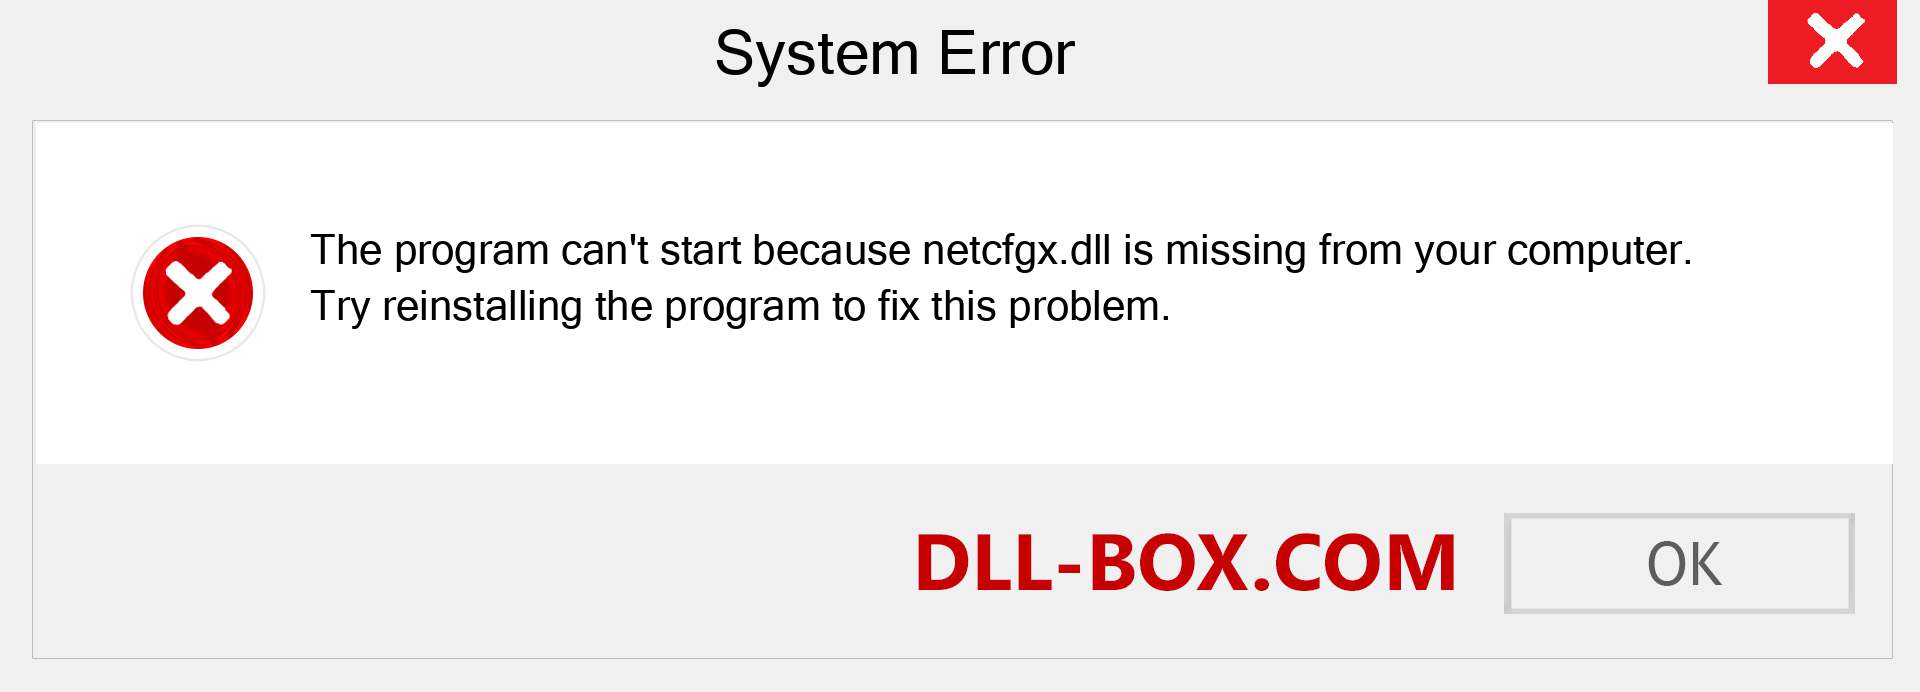  netcfgx.dll file is missing?. Download for Windows 7, 8, 10 - Fix  netcfgx dll Missing Error on Windows, photos, images